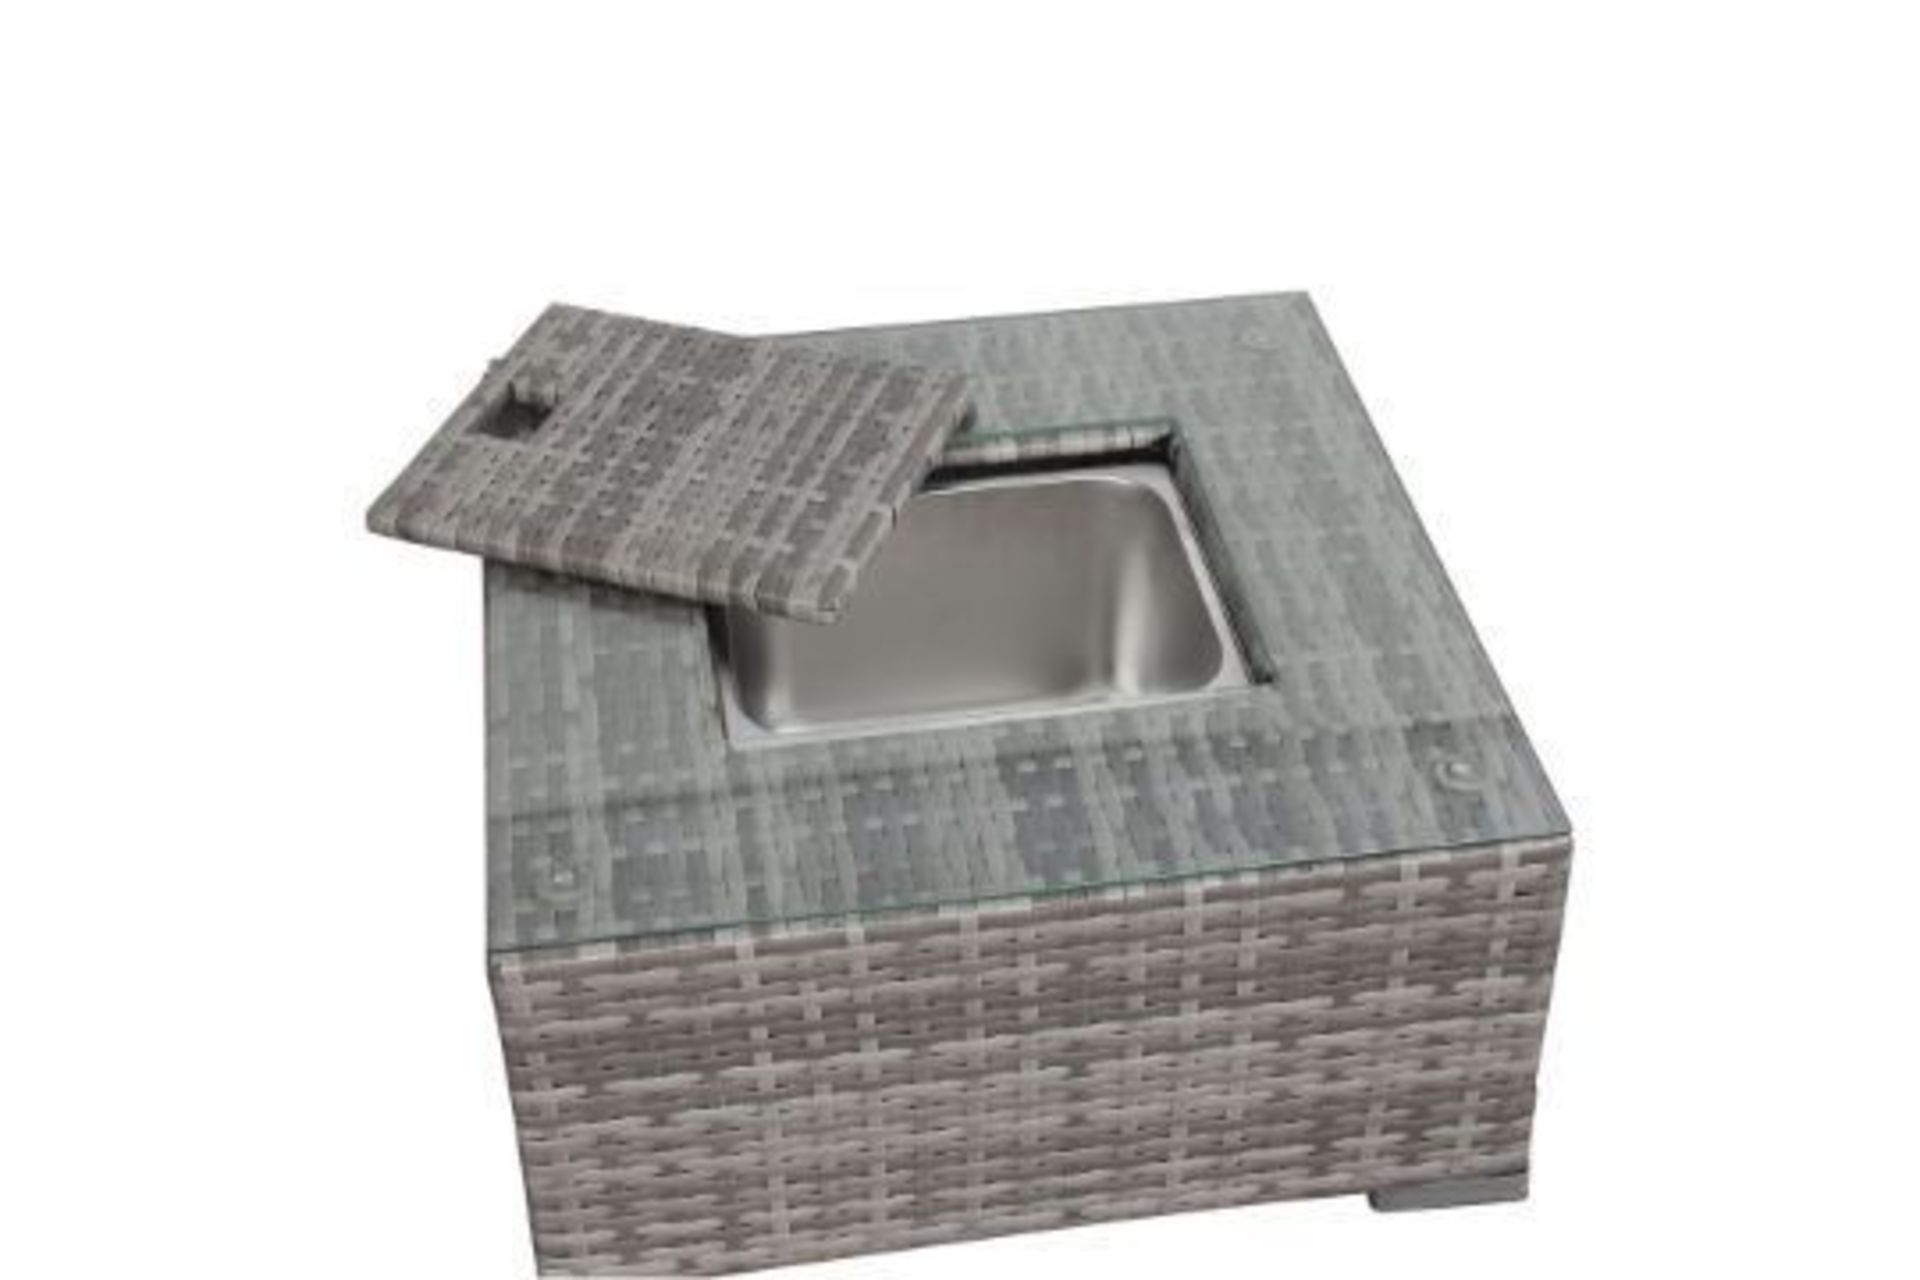 Brand new set of garden furniture with ice storage box built into the table, RRP £999 *PLUS VAT* - Image 4 of 6